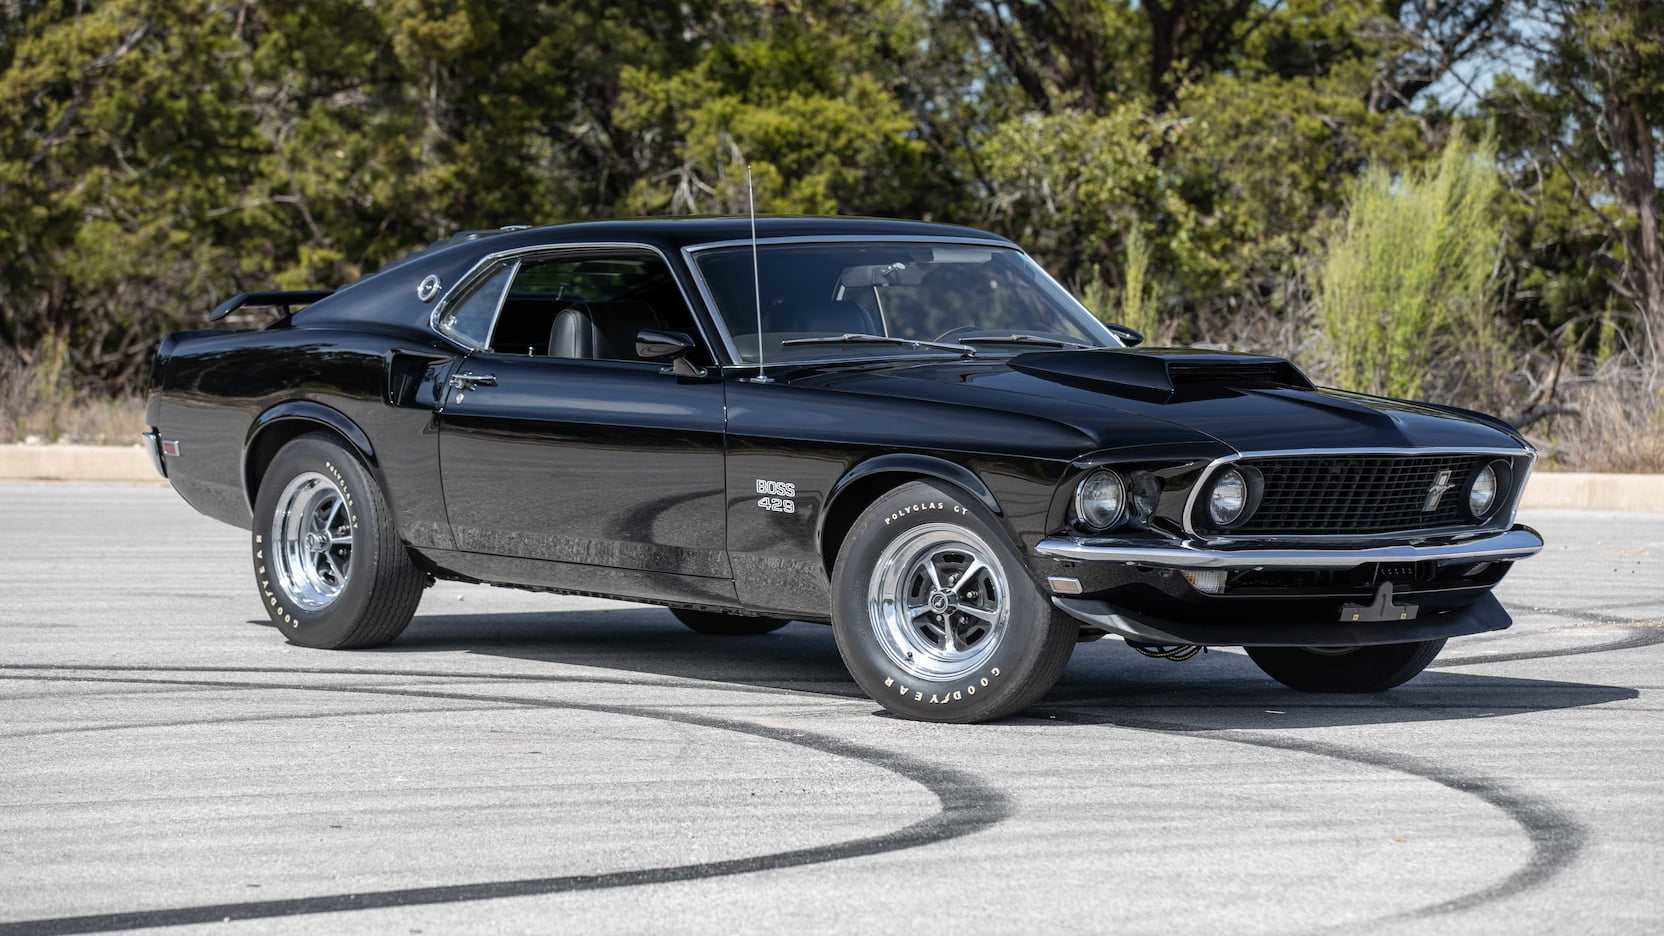 Paul Walker's 1969 Mustang Boss 429 Fastback Rare, It Can Be Yours - autoevolution